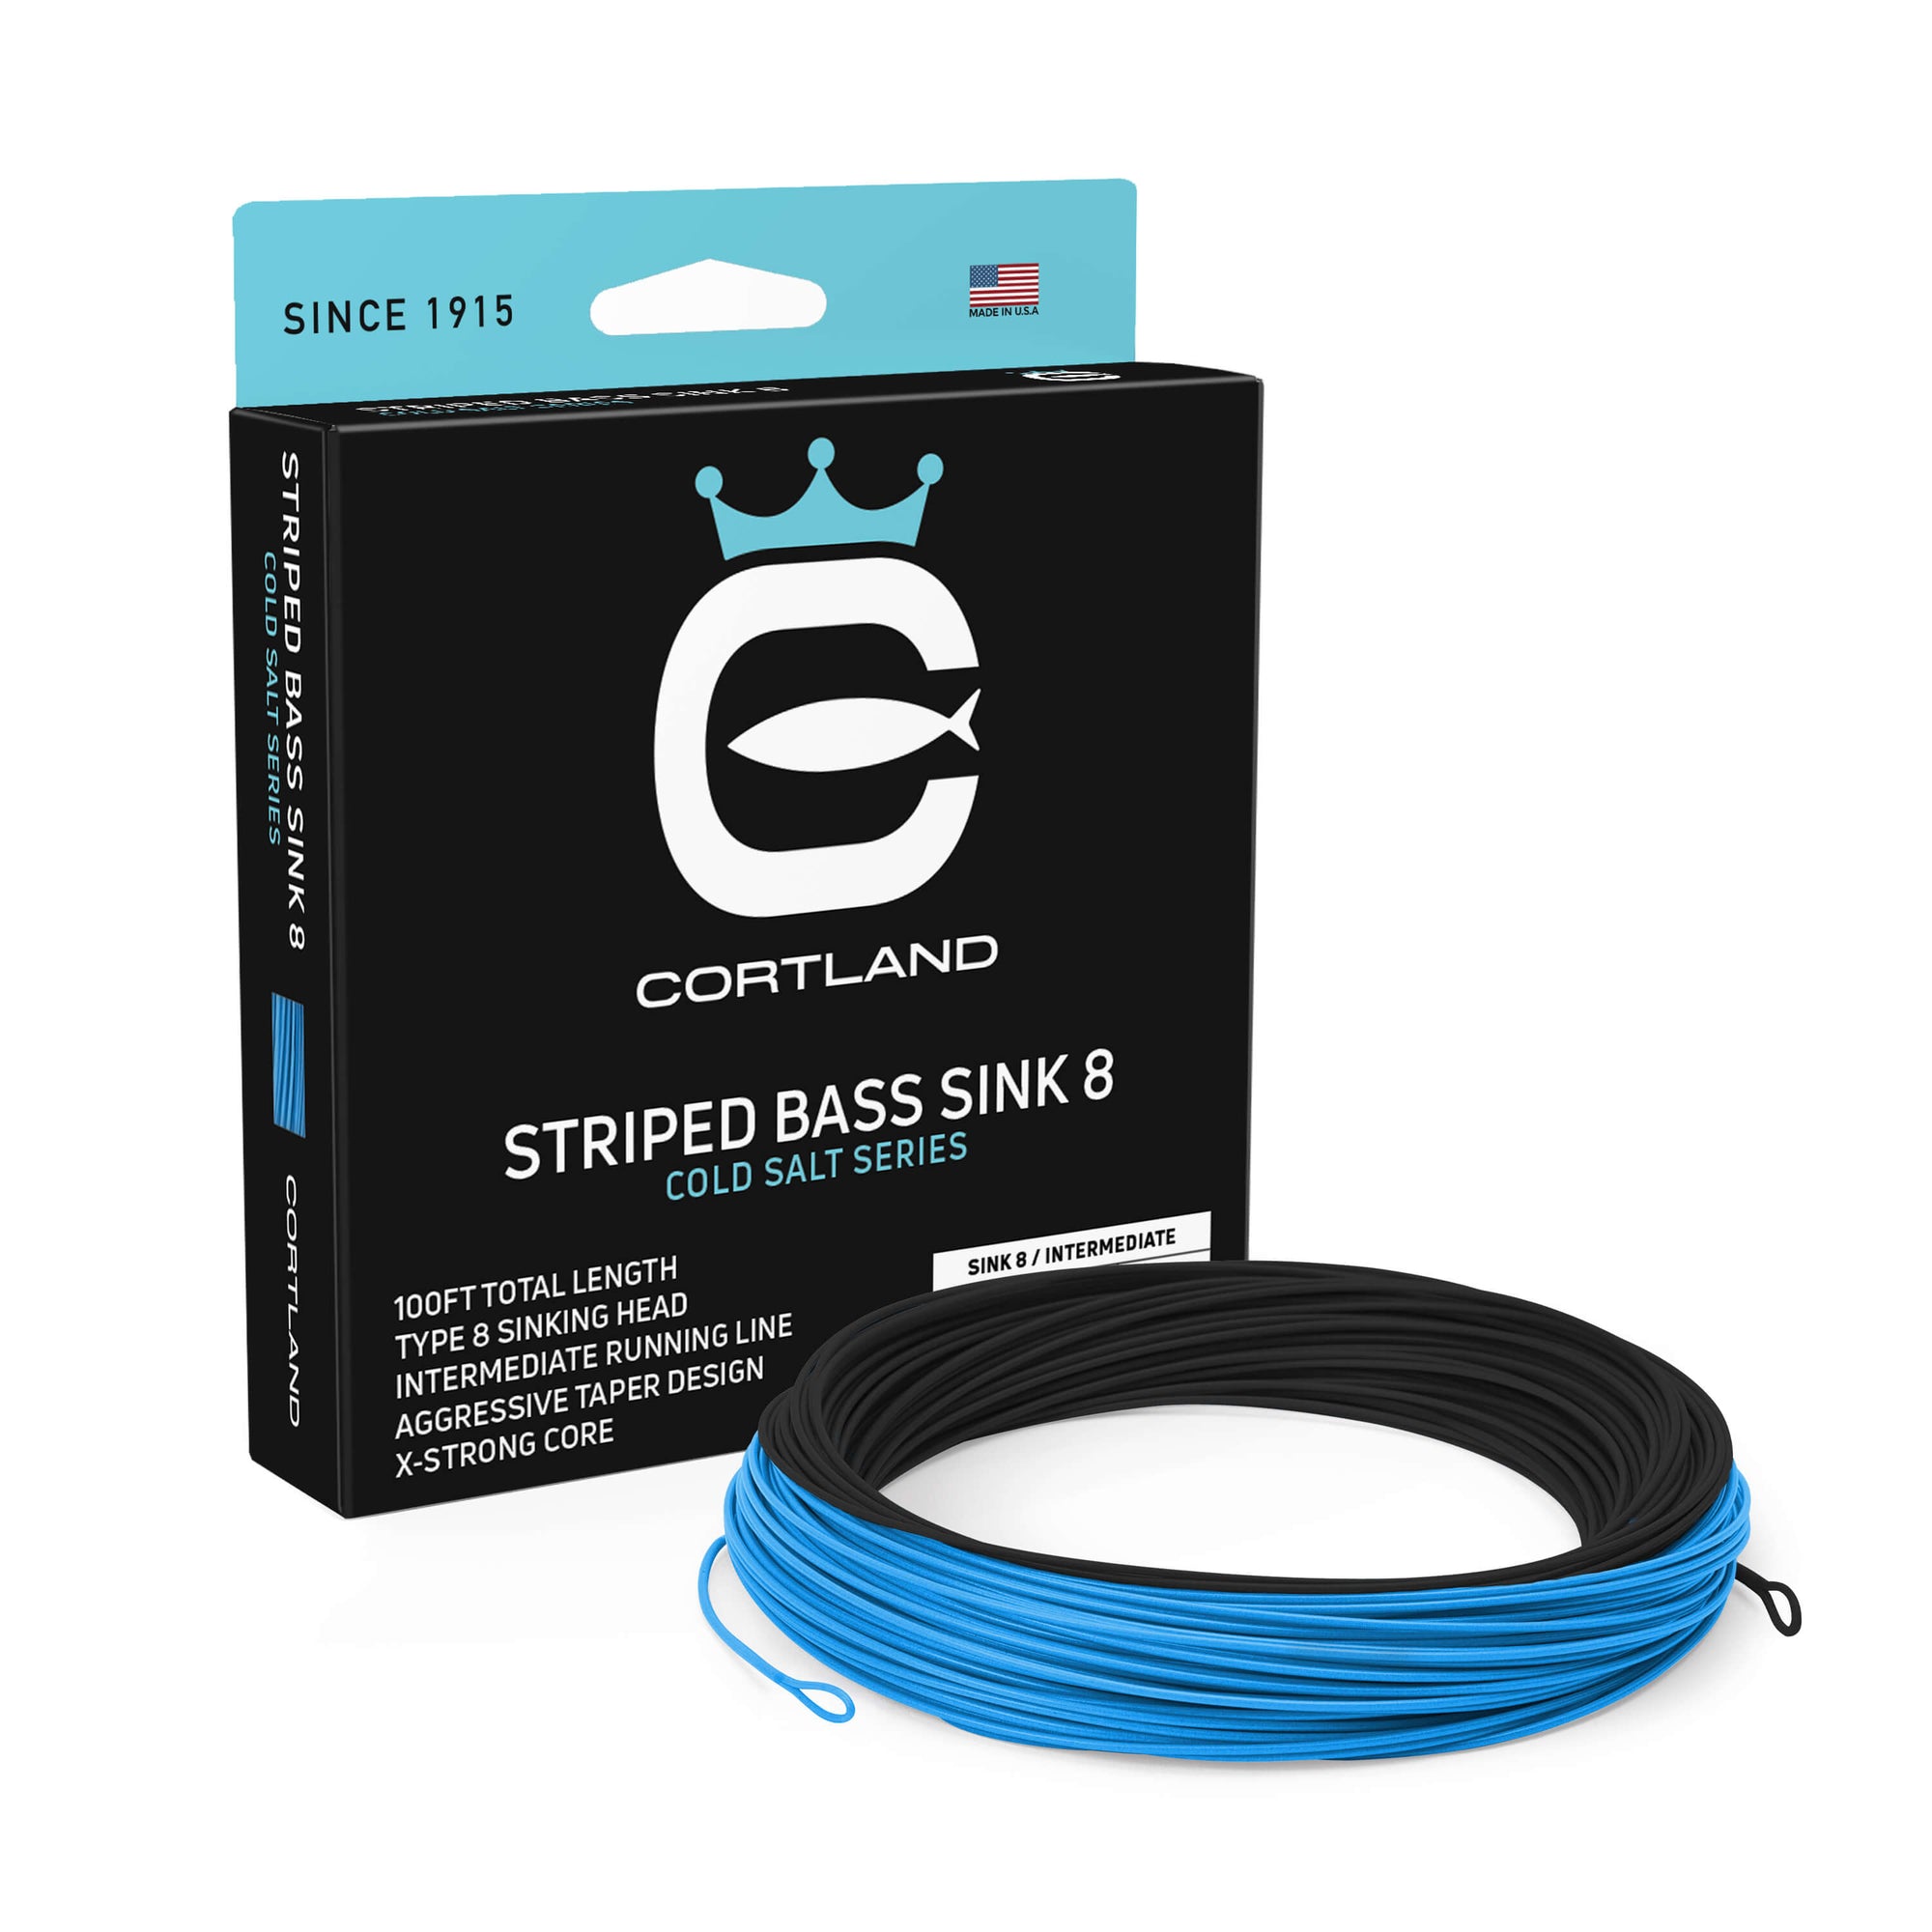 Striped Bass Sink 8 Fly Line Box and Coil. The coil is black and ice blue. The box is black and light blue at the top. 